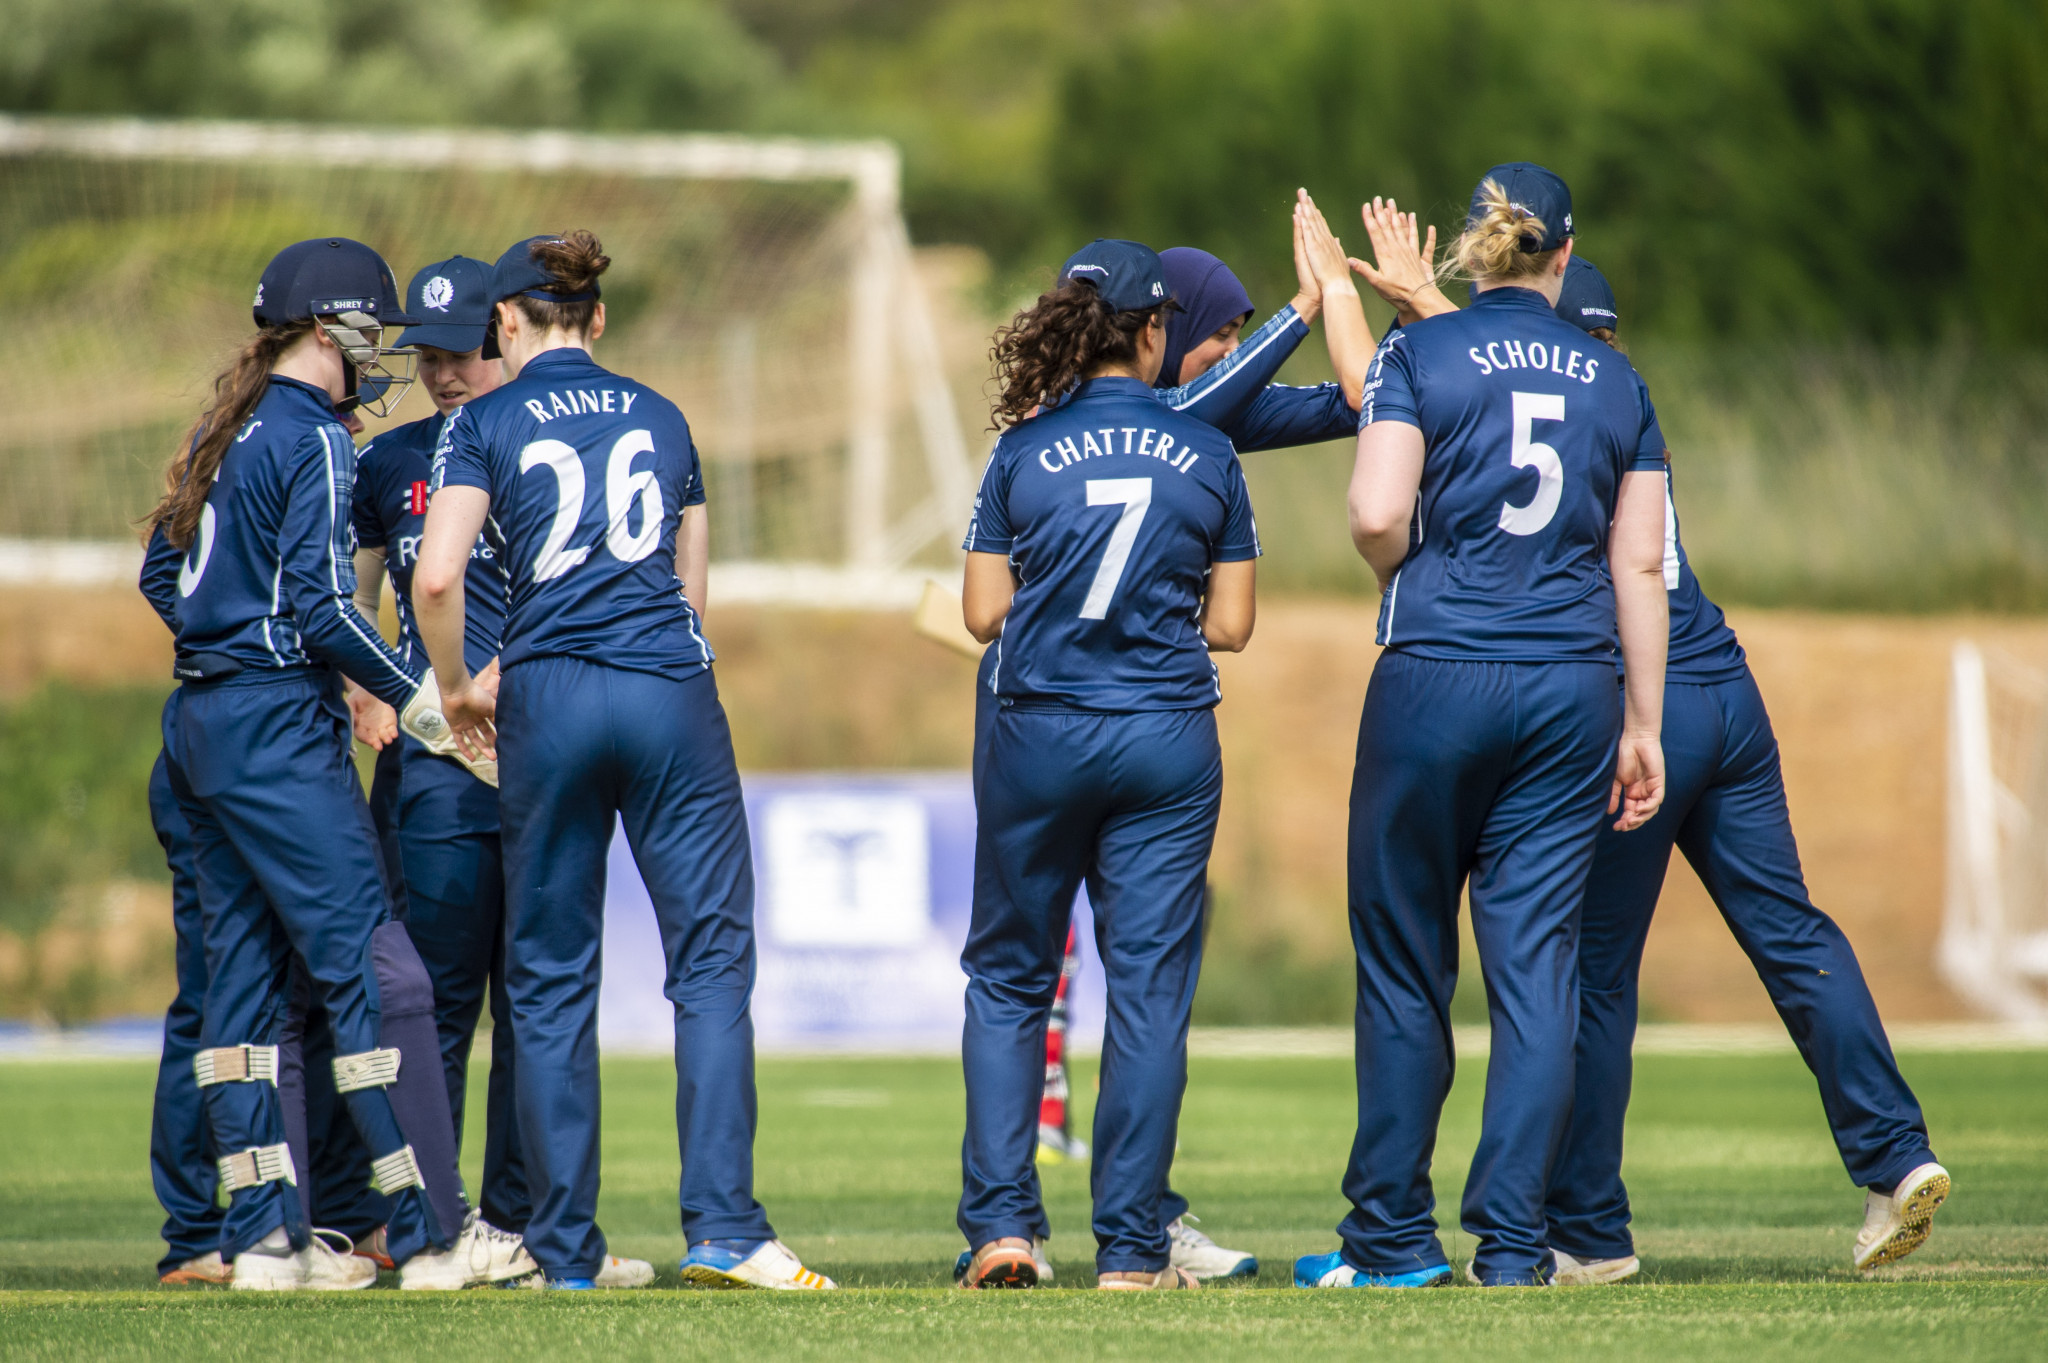 Scotland is set to host the European qualifier for the next Women's T20 World Cup ©Scotland Cricket